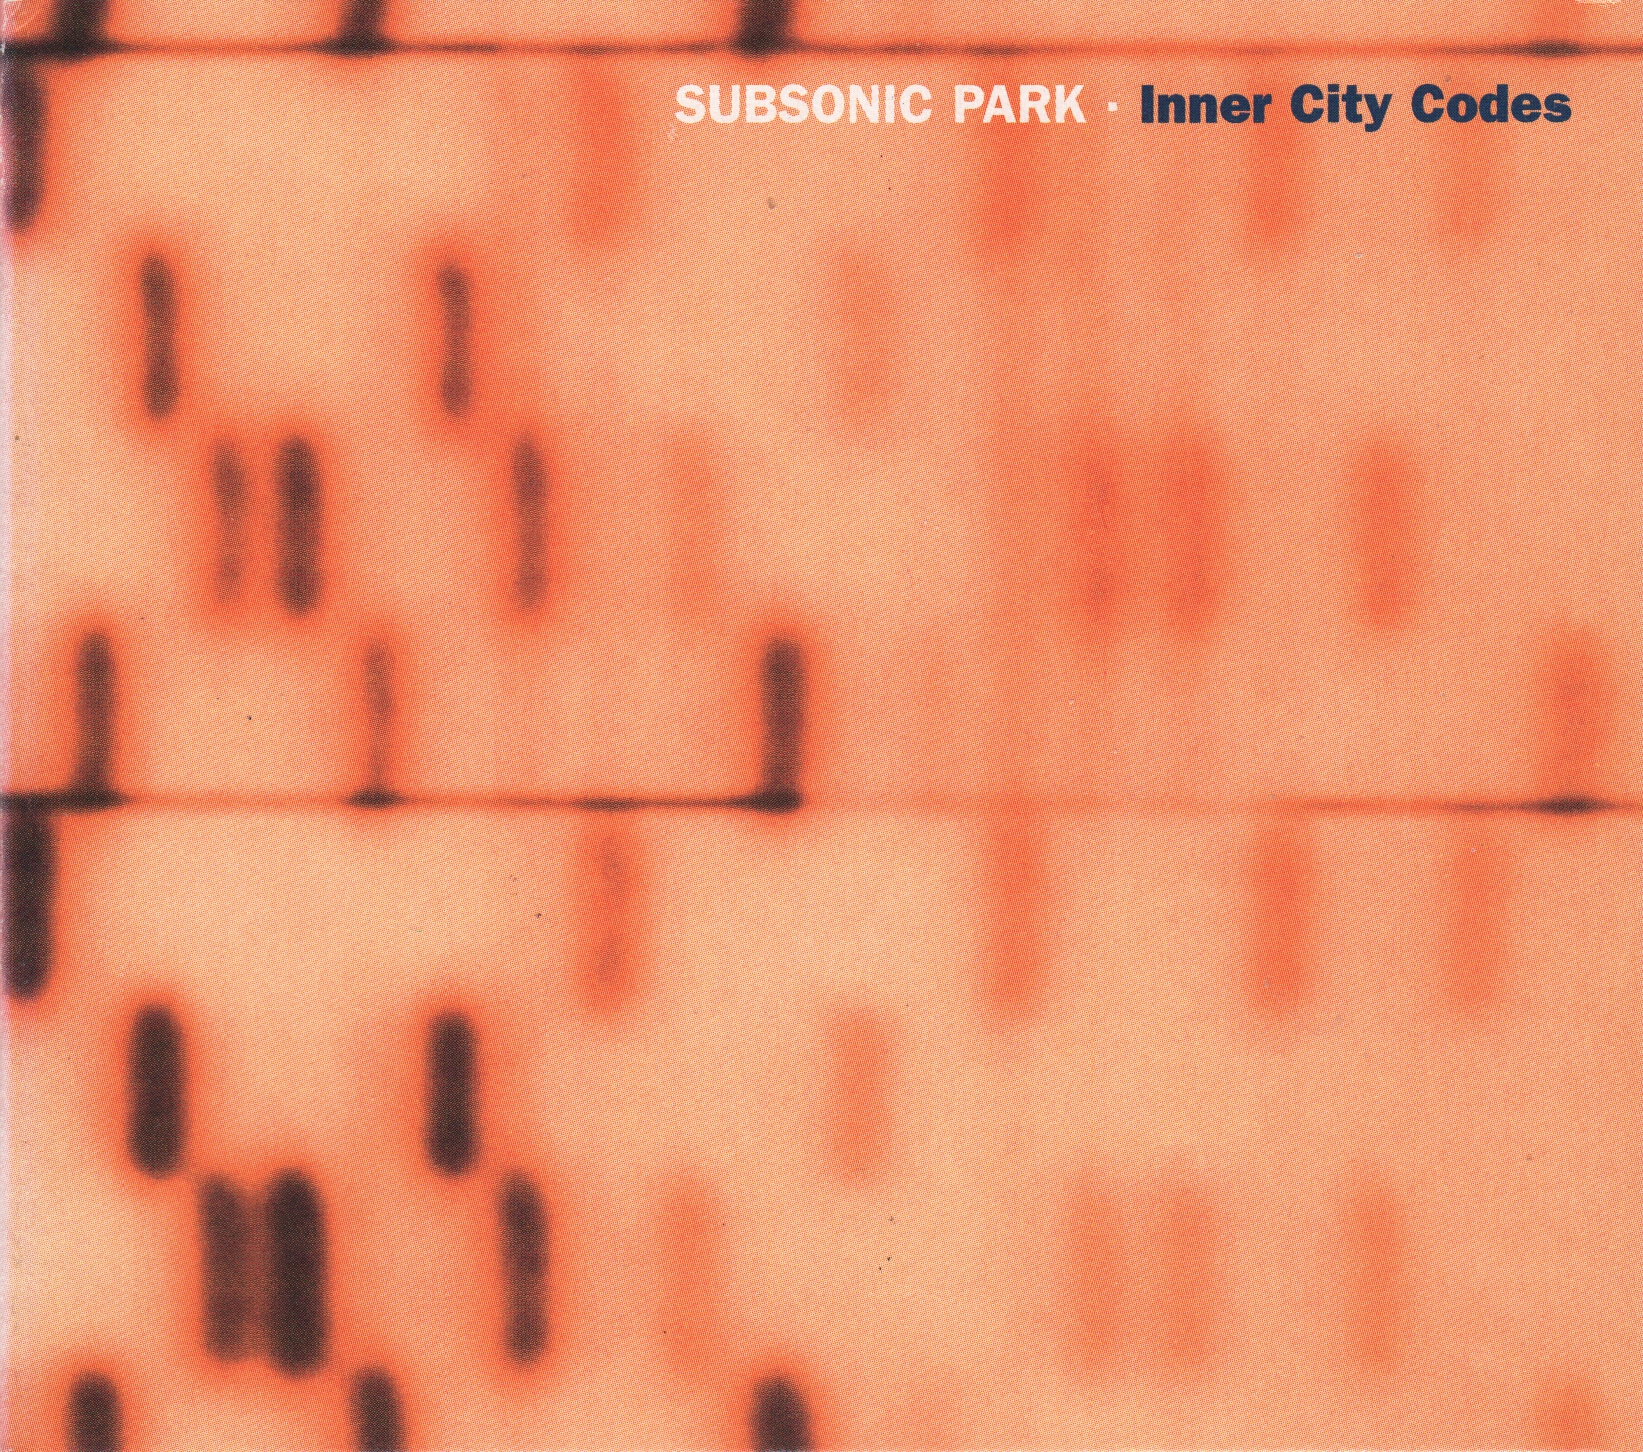 Subsonic Park - Inner City Codes